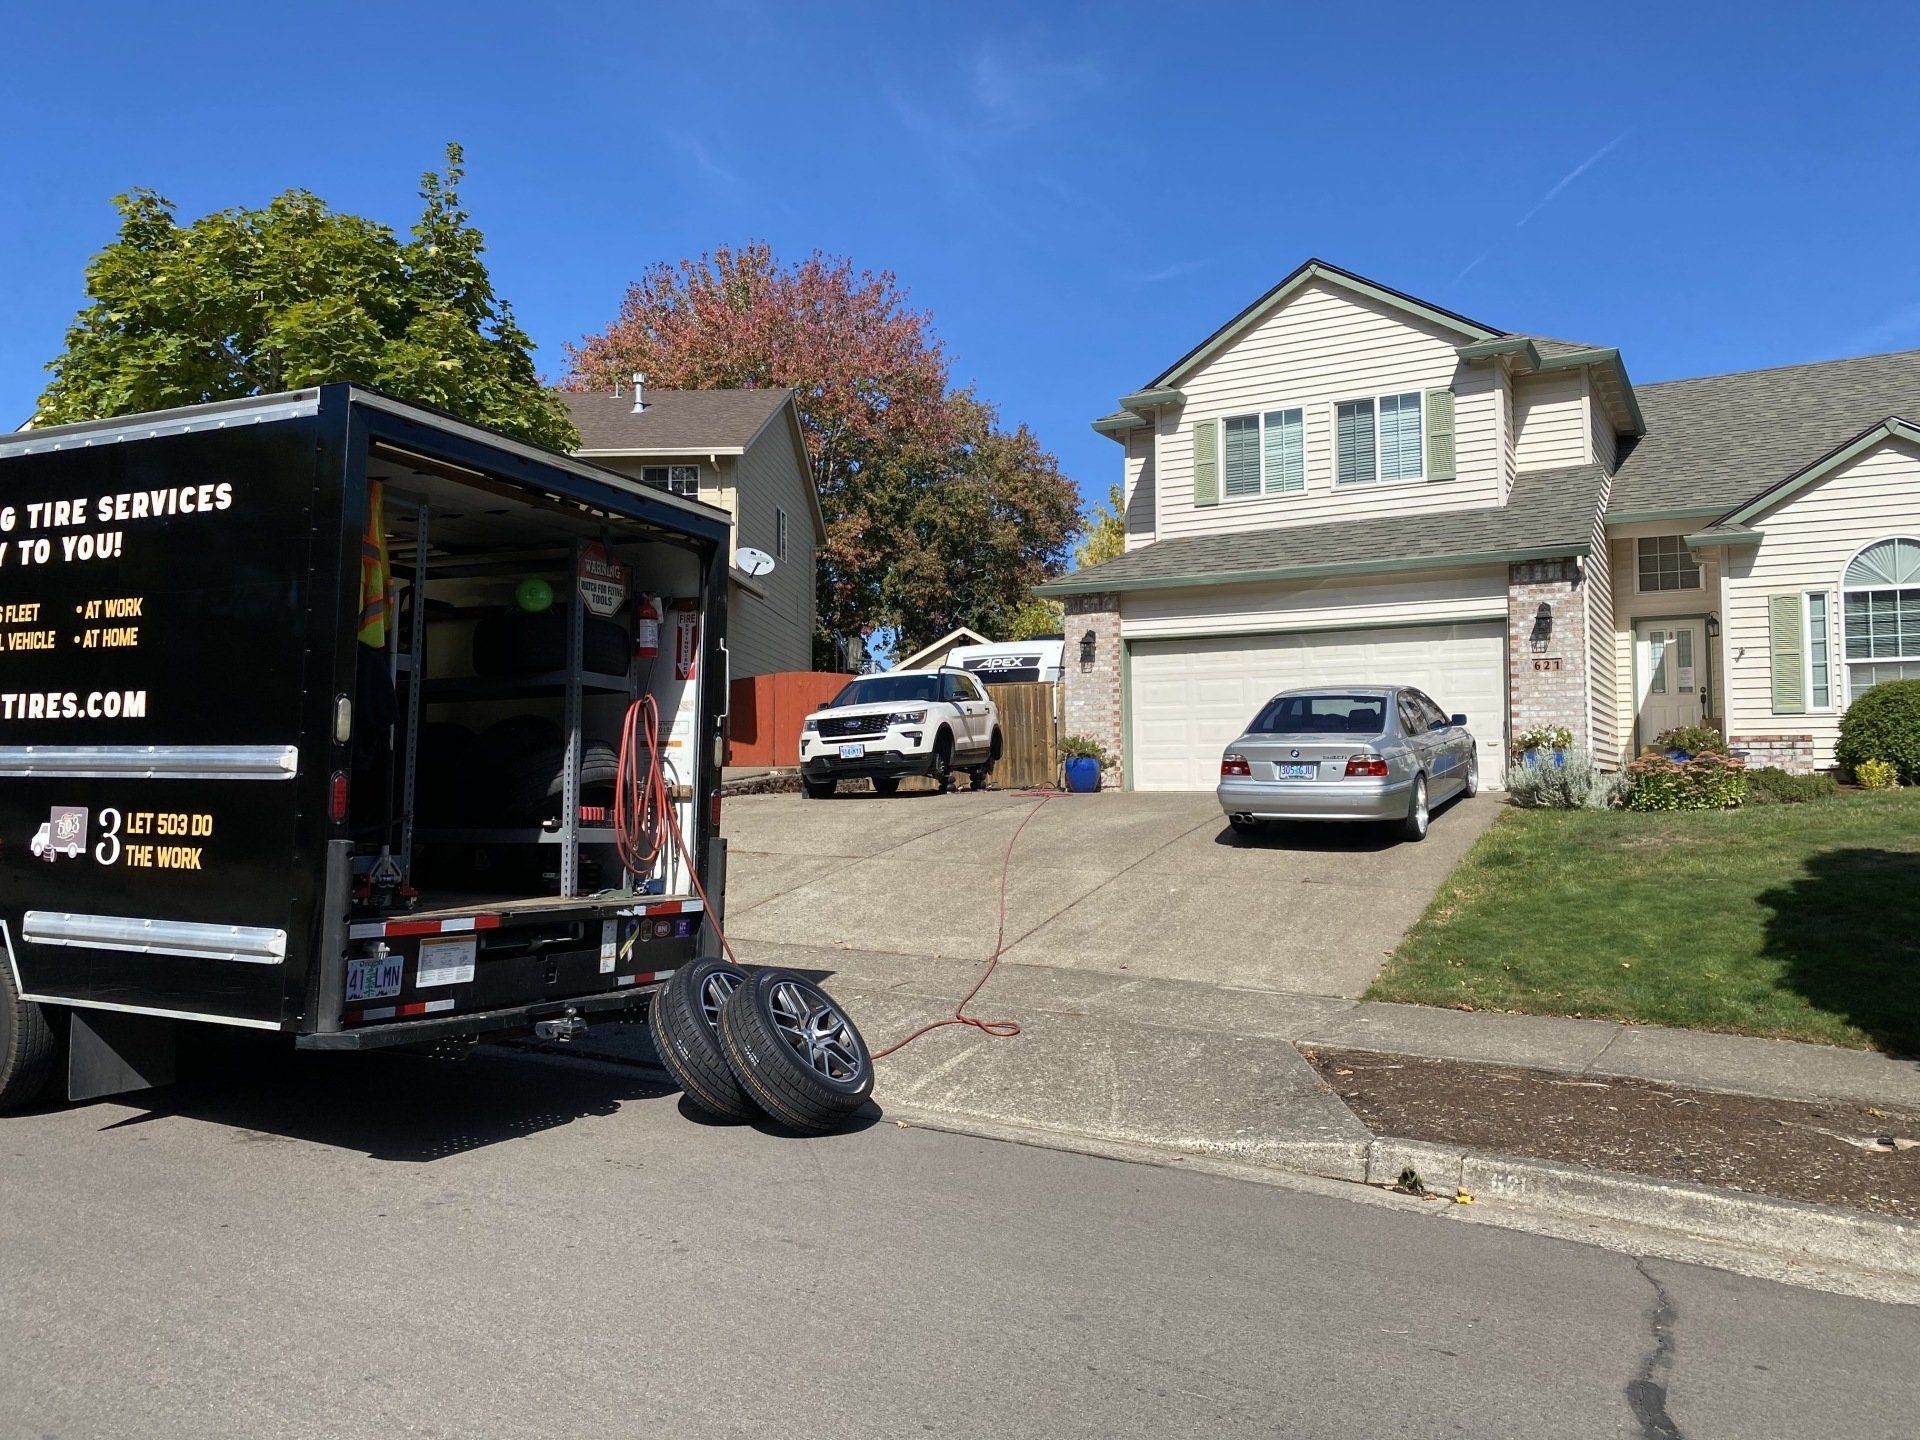 Picture of the 503 Tires truck parked outside of a residential house.